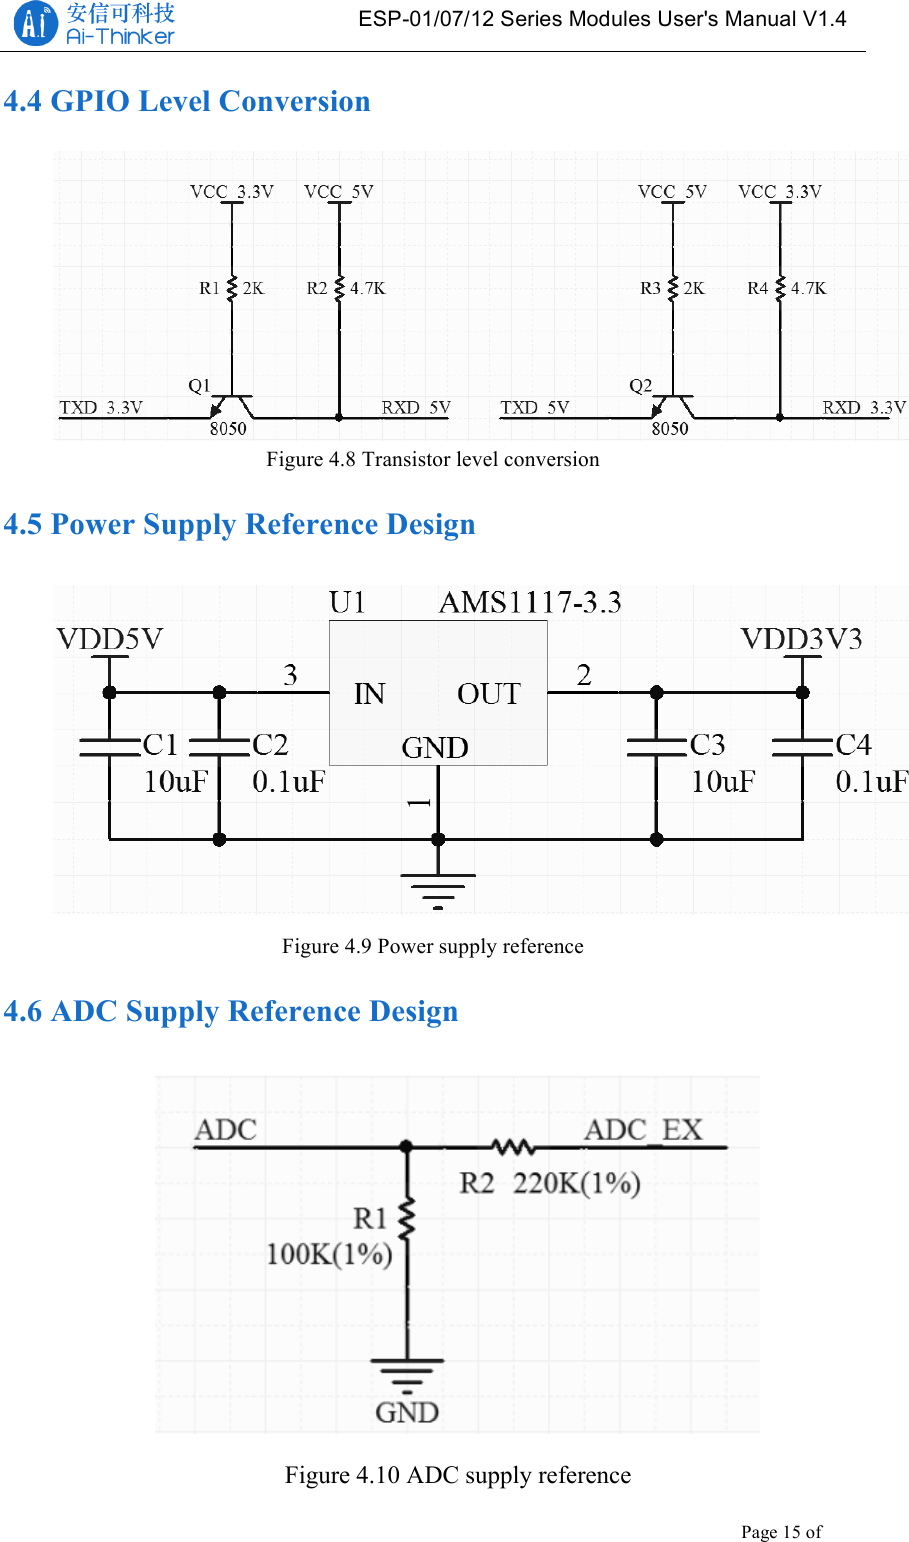   ESP-01/07/12 Series Modules User&apos;s Manual V1.4 Copyright © 2017 Shenzhen Ai-Thinker Technology Co., Ltd All Rights Reserved Page 15 of 23   4.4 GPIO Level Conversion  Figure 4.8 Transistor level conversion 4.5 Power Supply Reference Design  Figure 4.9 Power supply reference 4.6 ADC Supply Reference Design  Figure 4.10 ADC supply reference 